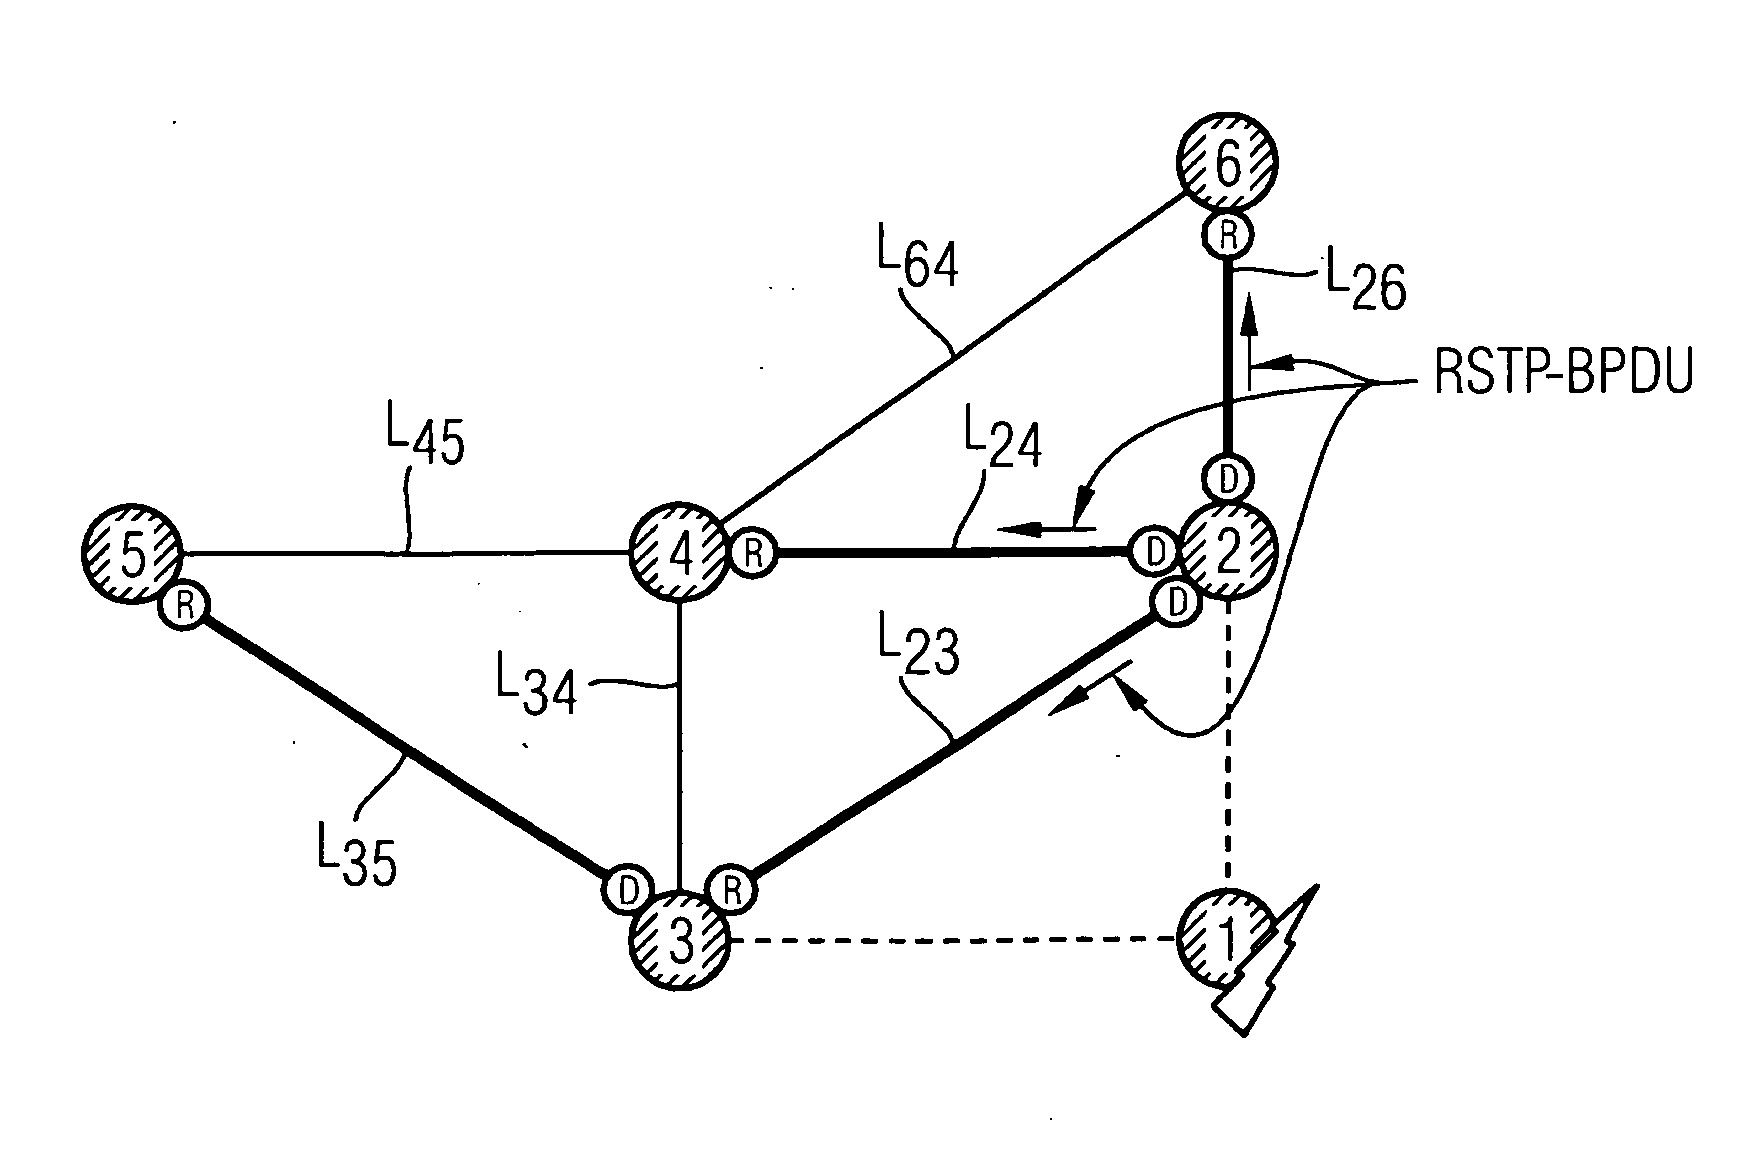 Method for reconfiguring a communication network